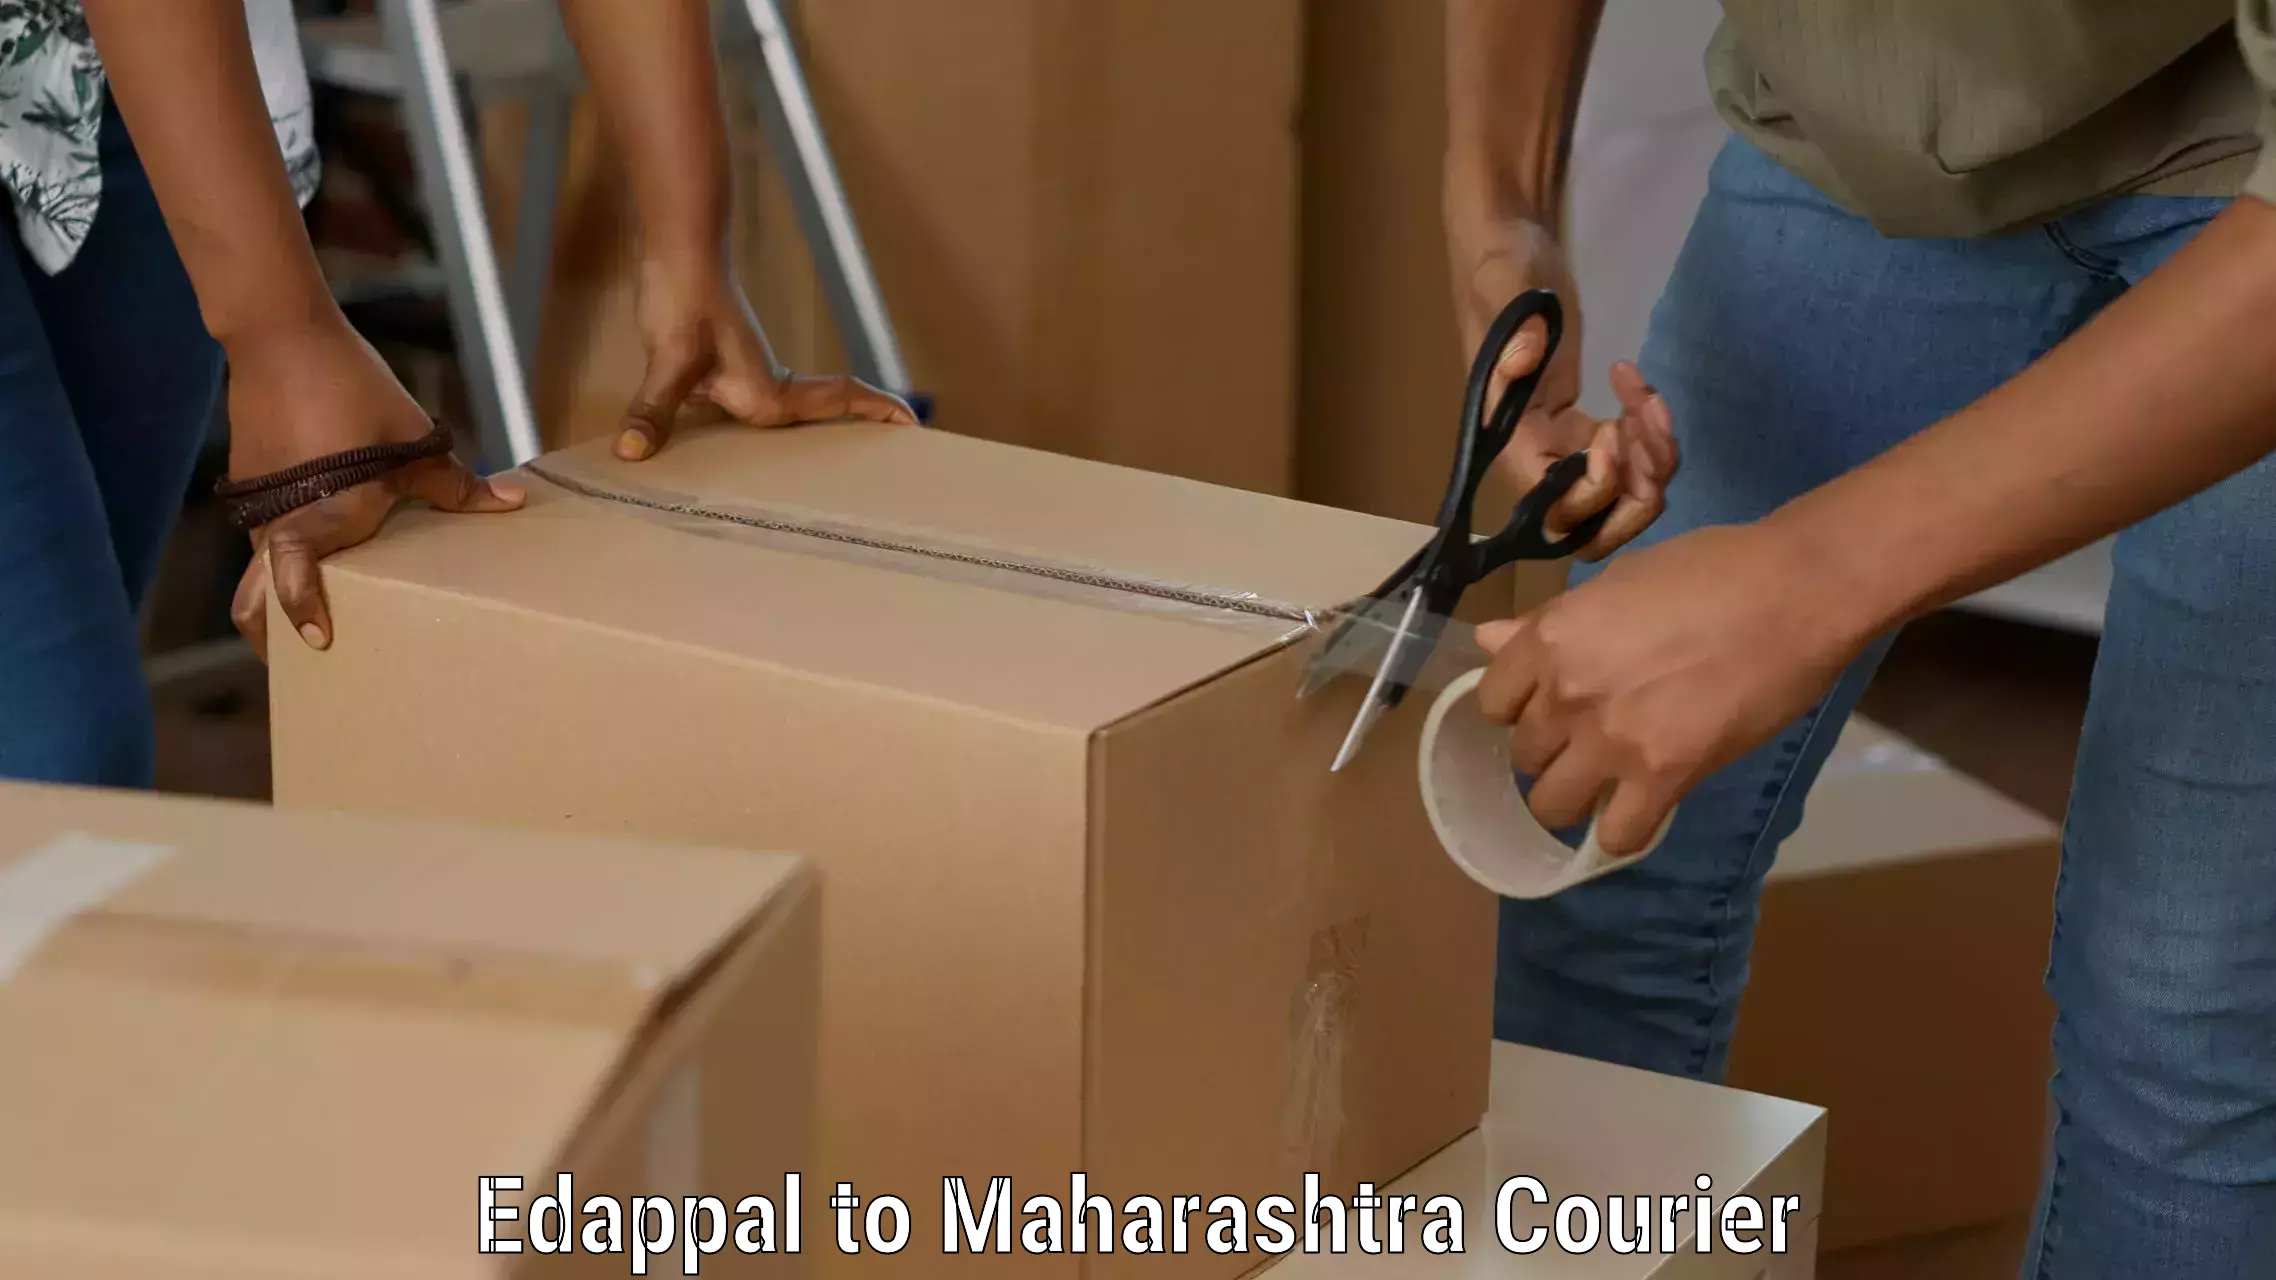 Next-day delivery options Edappal to IIT Mumbai